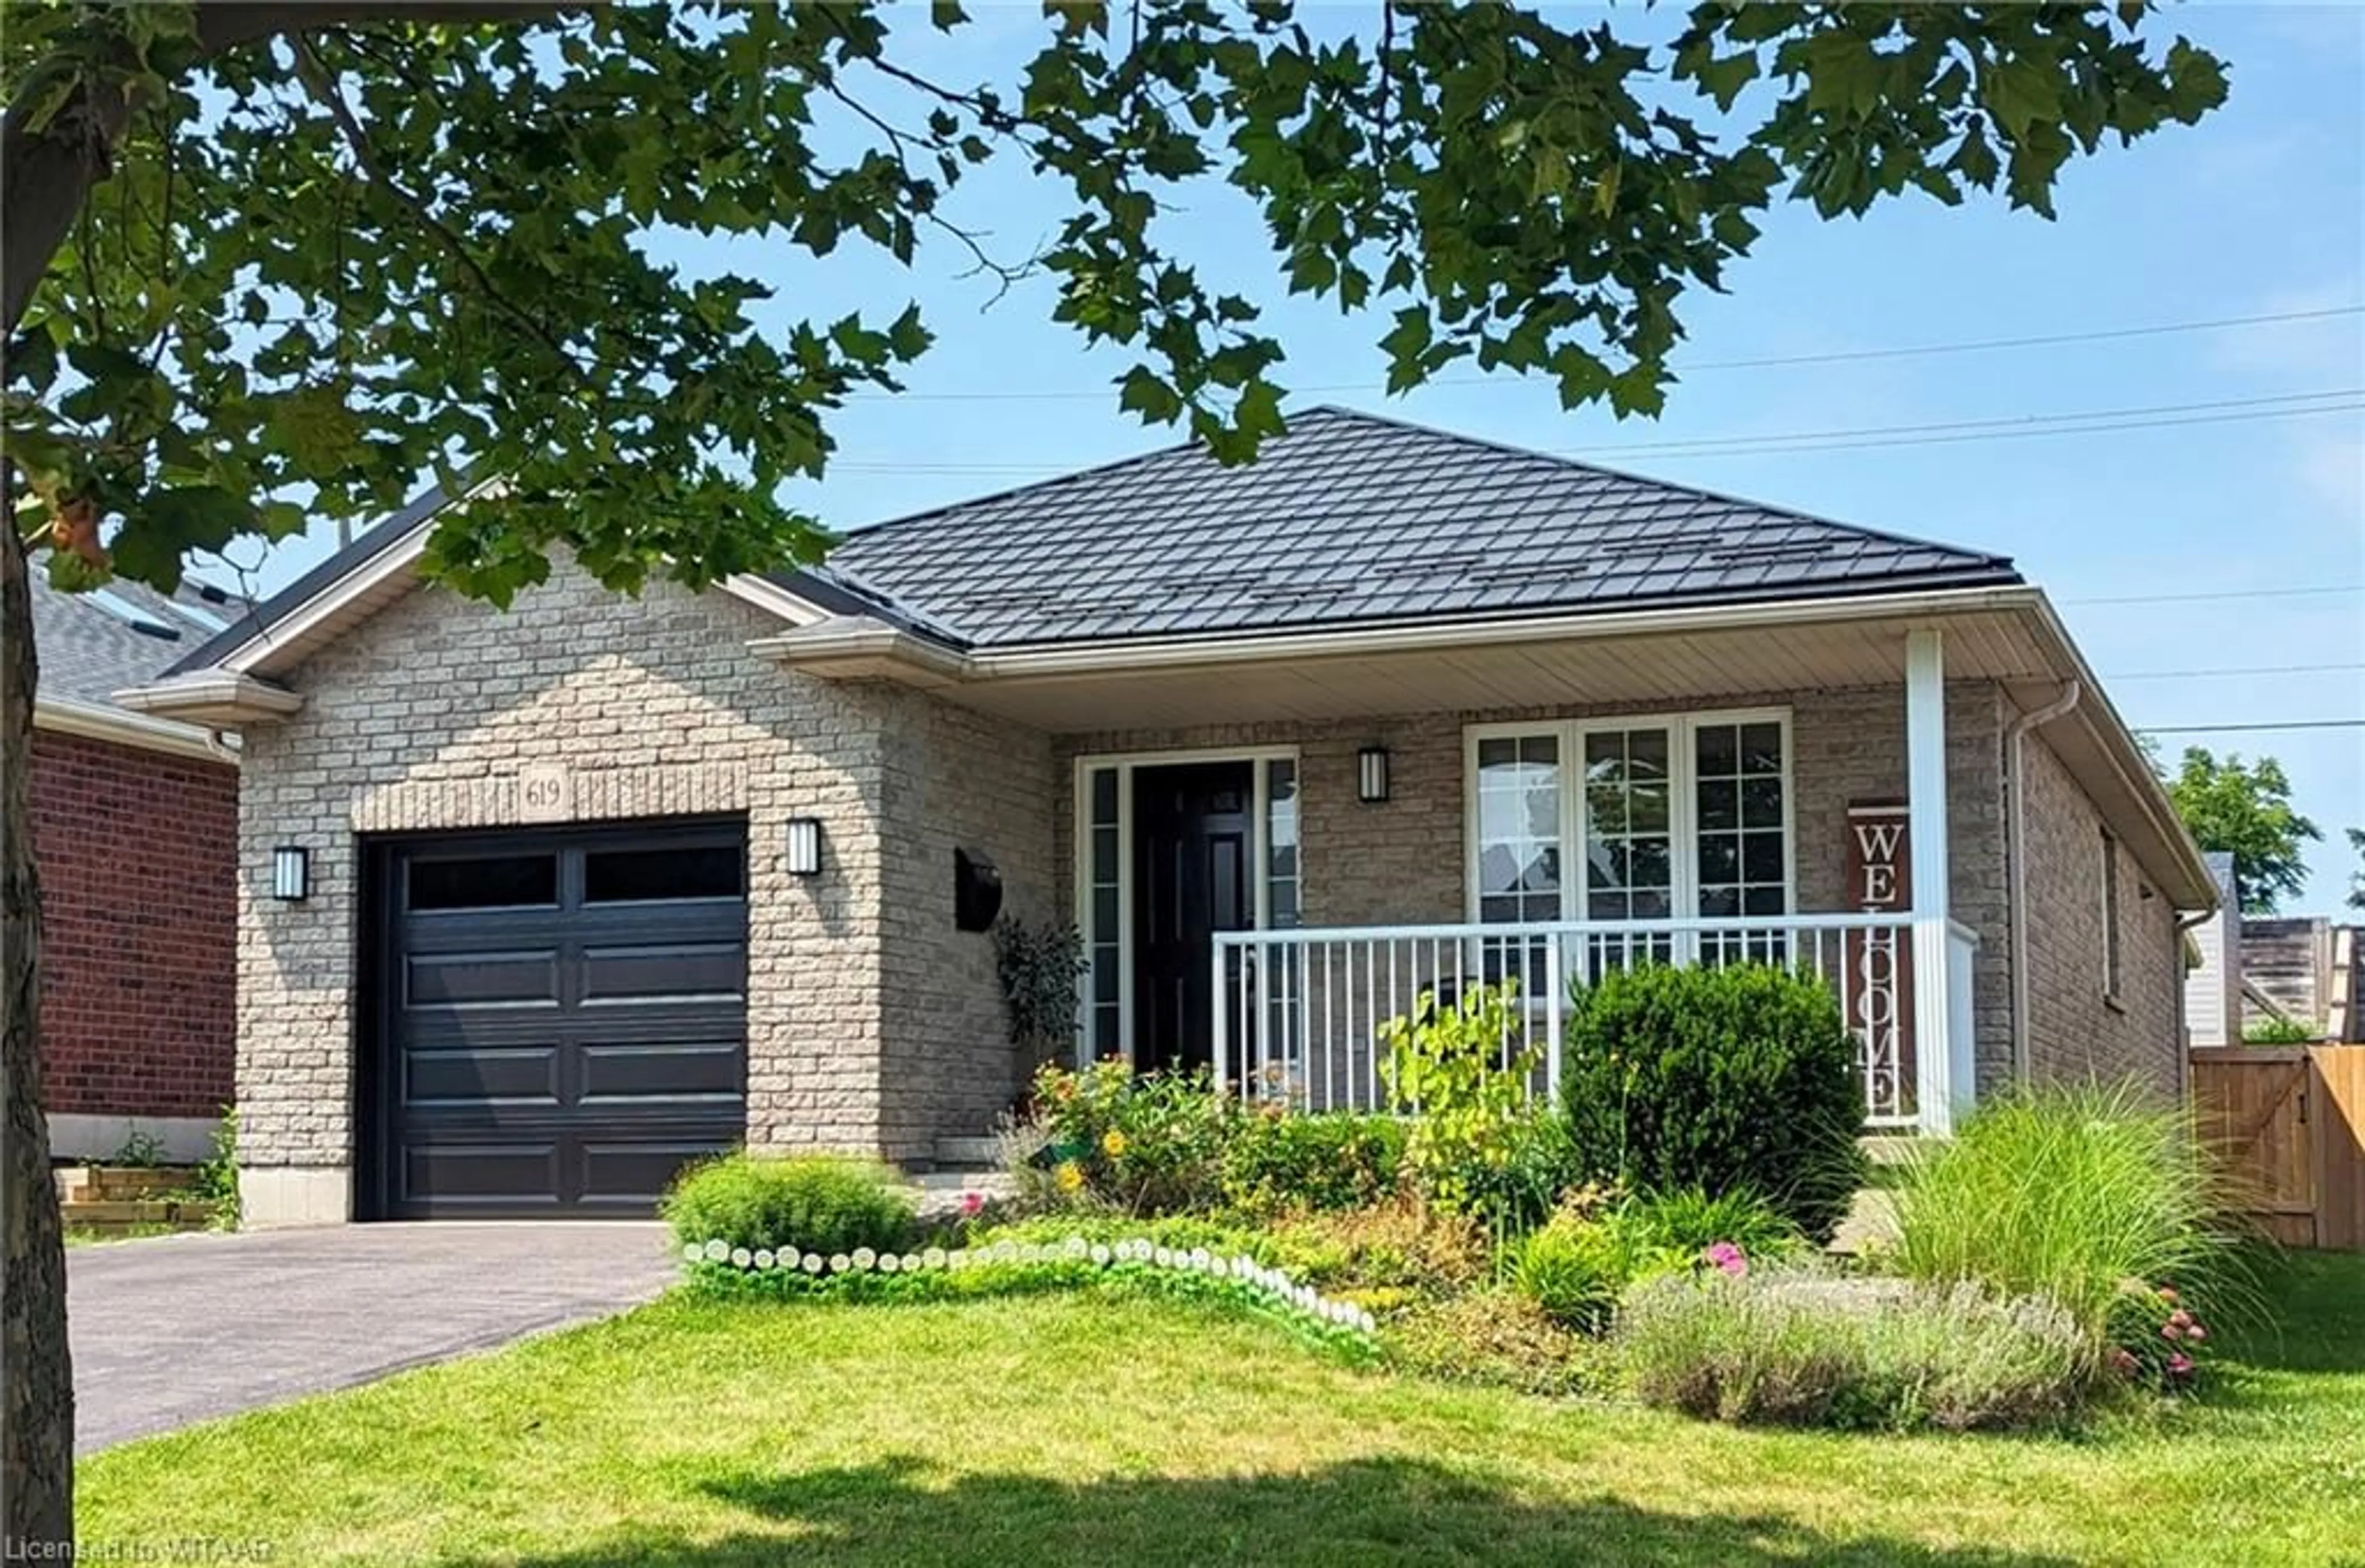 Home with brick exterior material for 619 Southwood Way, Woodstock Ontario N4S 9A5